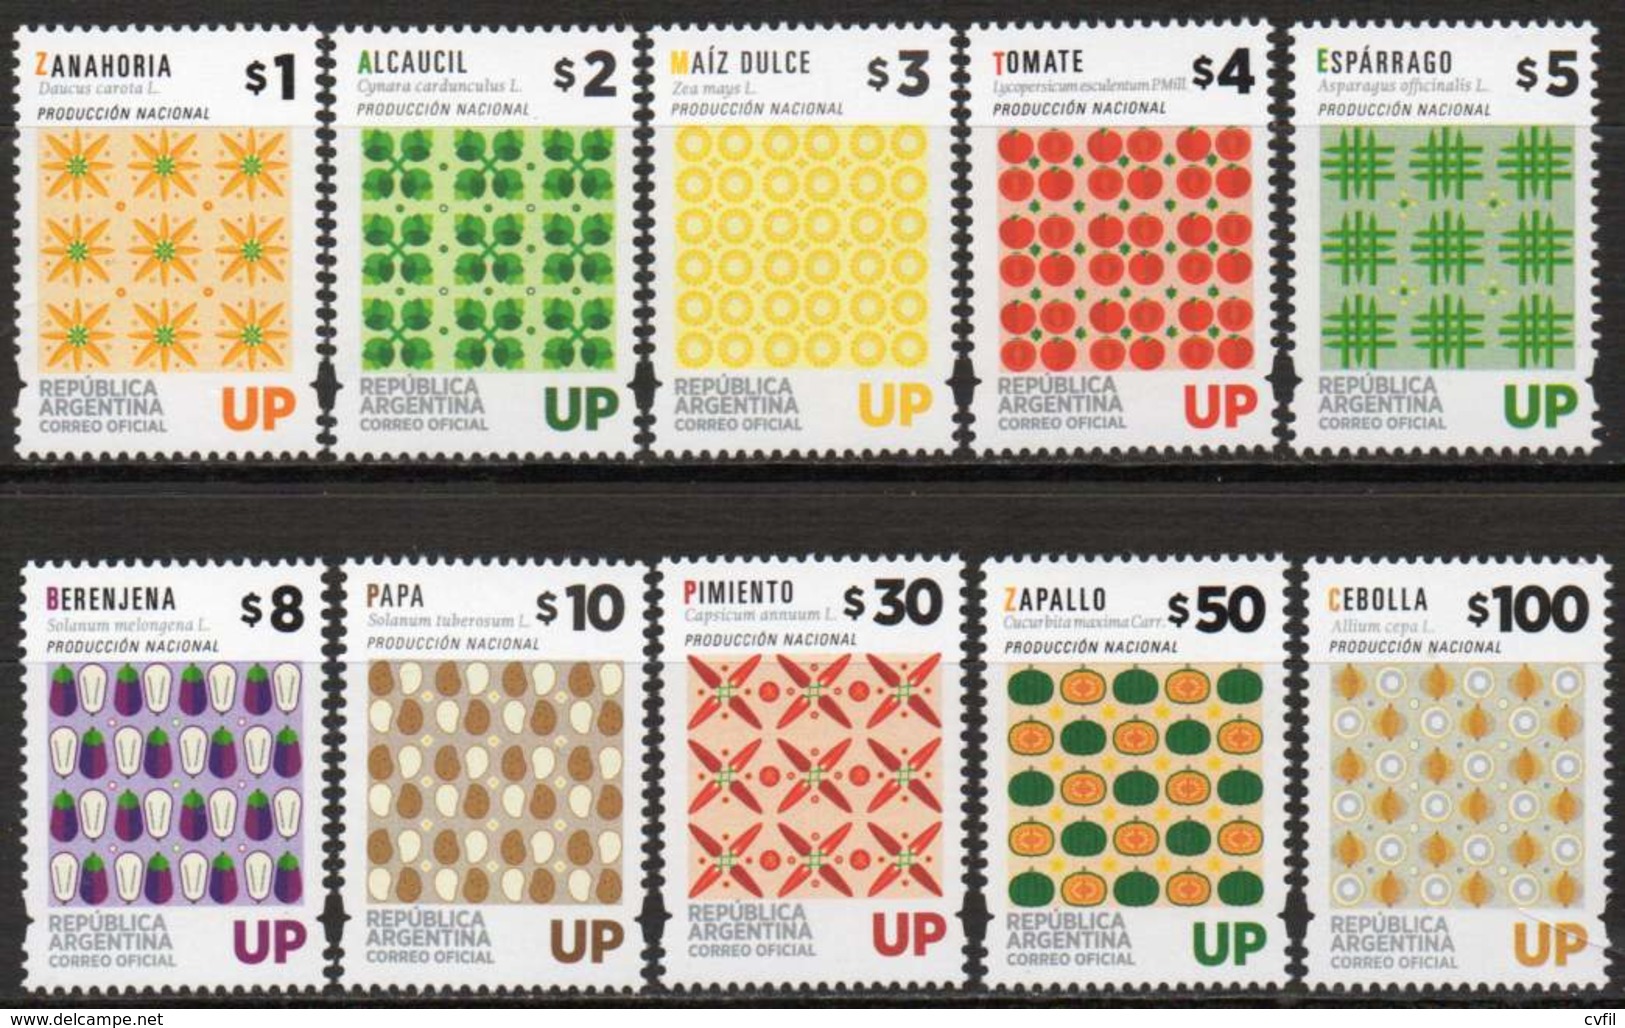 ARGENTINA 2016 - The Complete Set Of The Definitives For UP Depicting Vegetables (10) Mint, NH - Unused Stamps